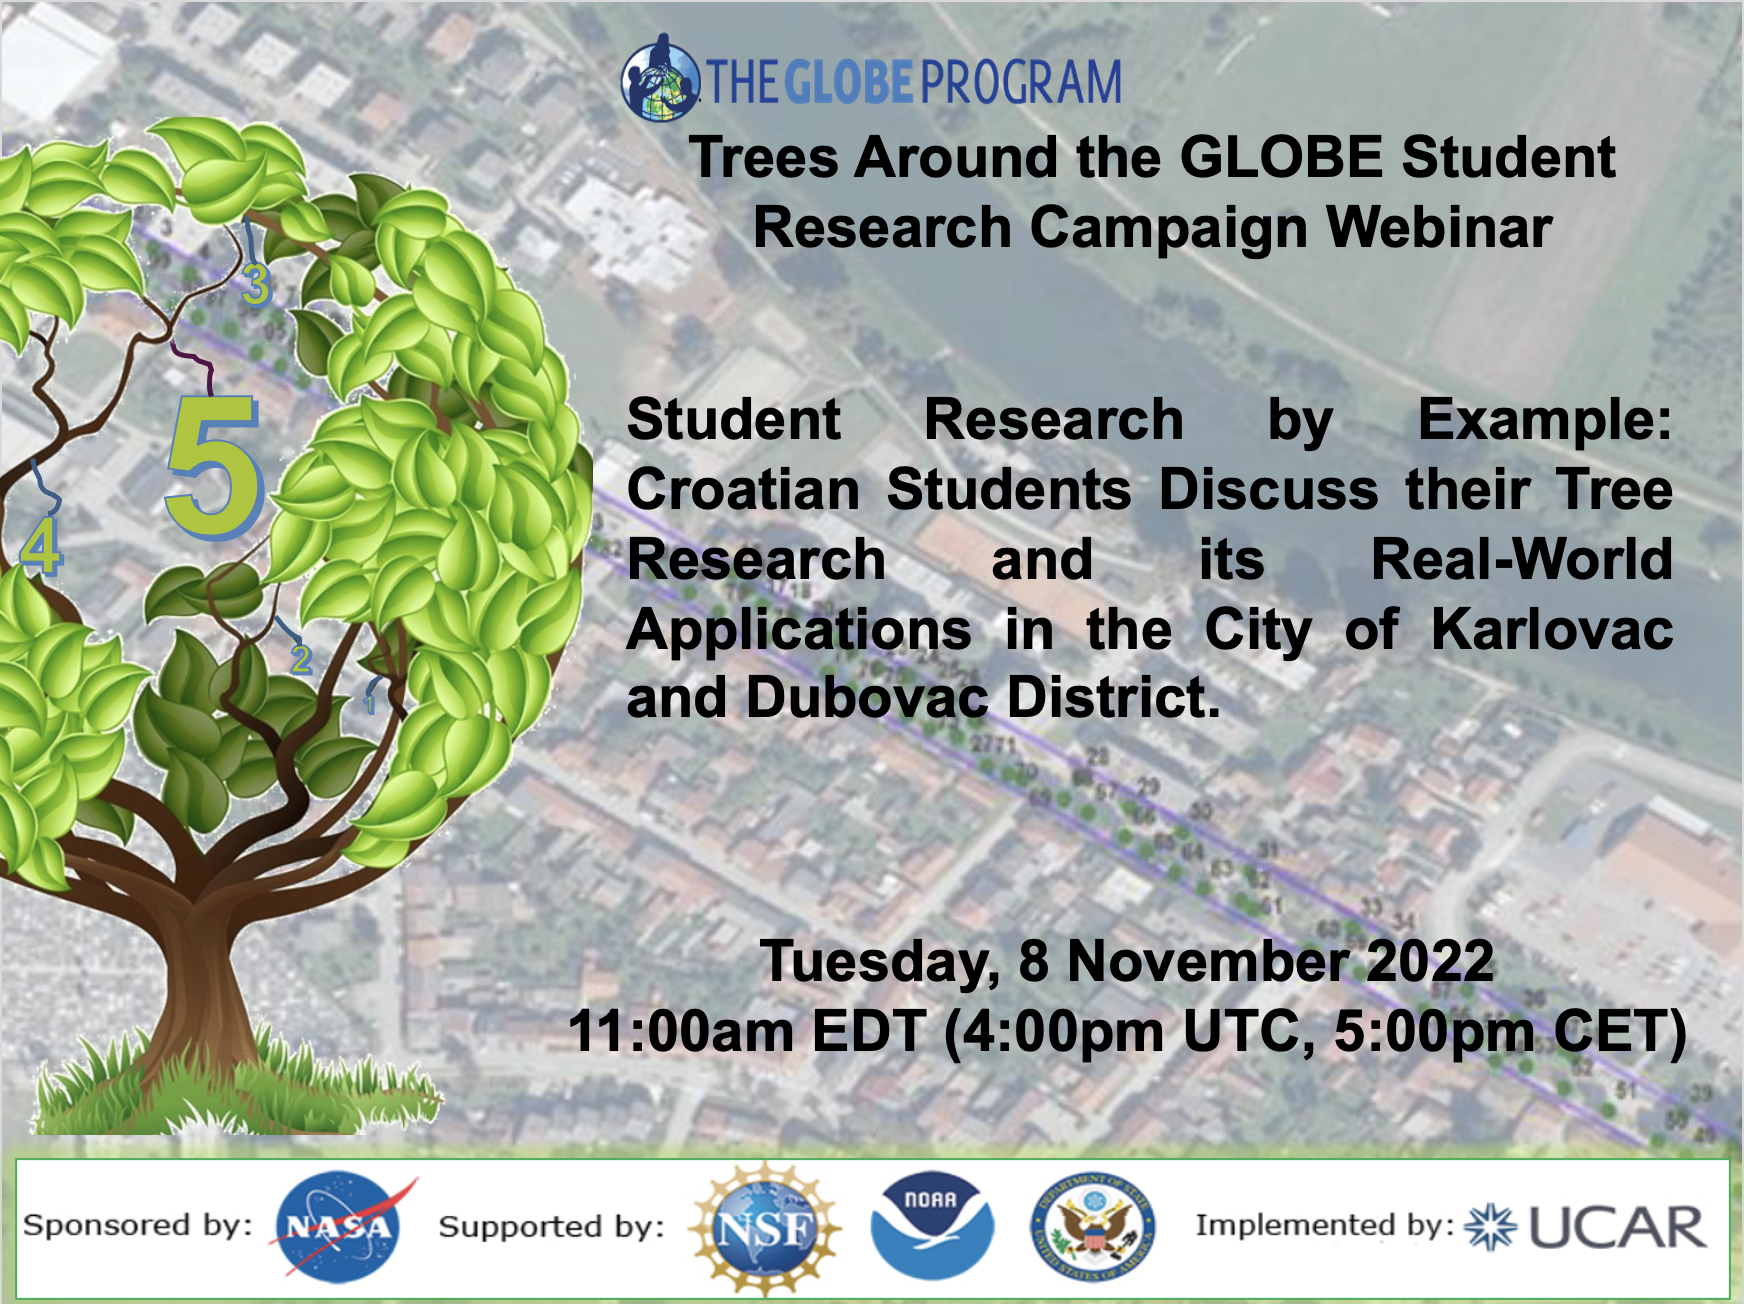 Trees Around the GLOBE campaign 08 November webinar shareable, showing the title and date of the event